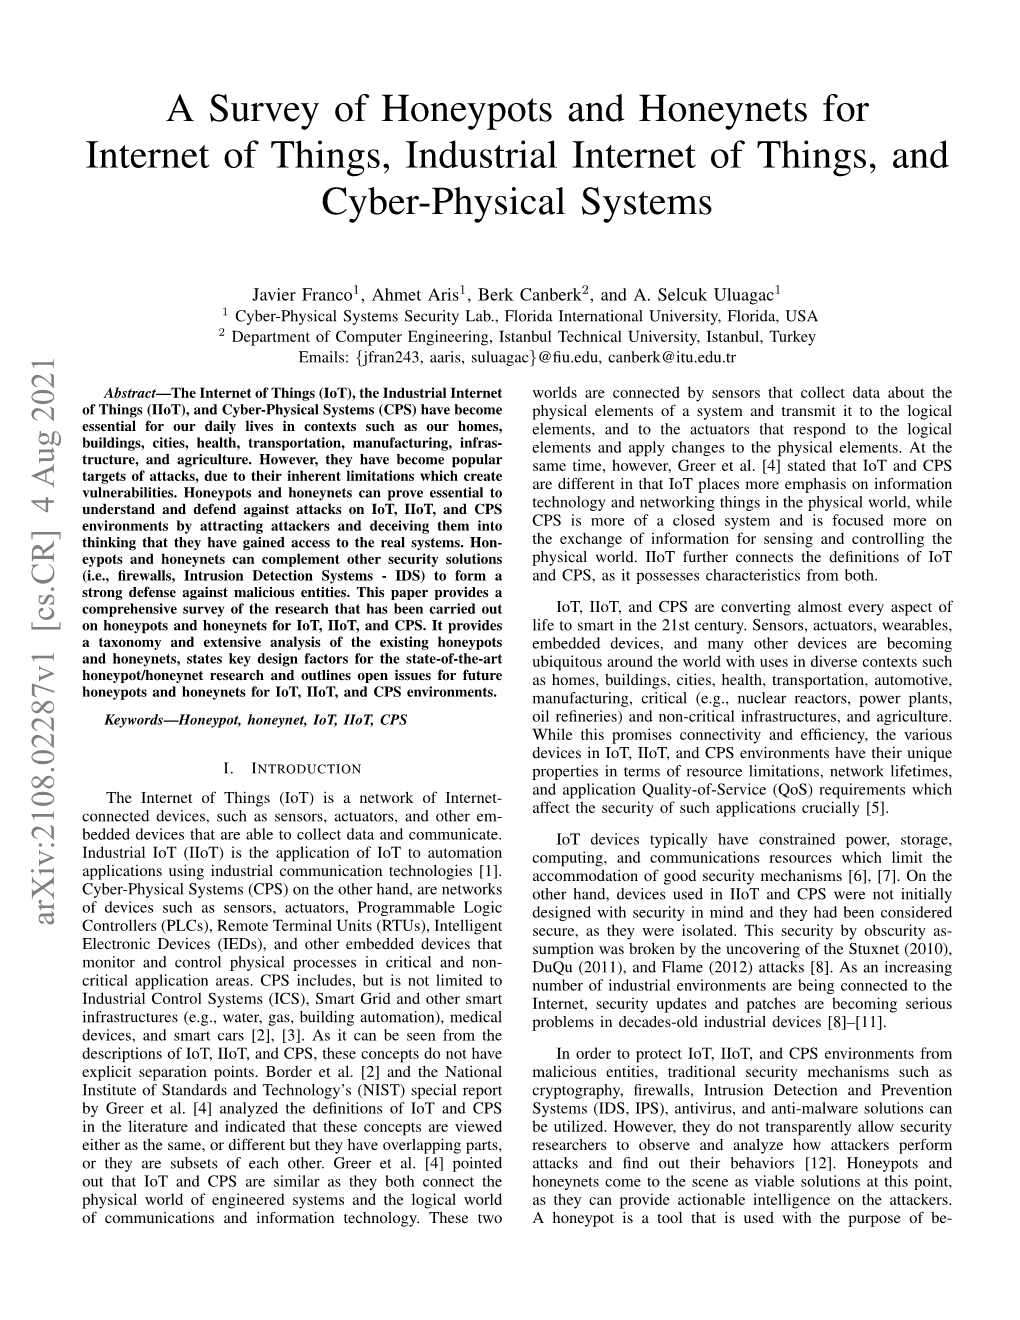 A Survey of Honeypots and Honeynets for Internet of Things, Industrial Internet of Things, and Cyber-Physical Systems